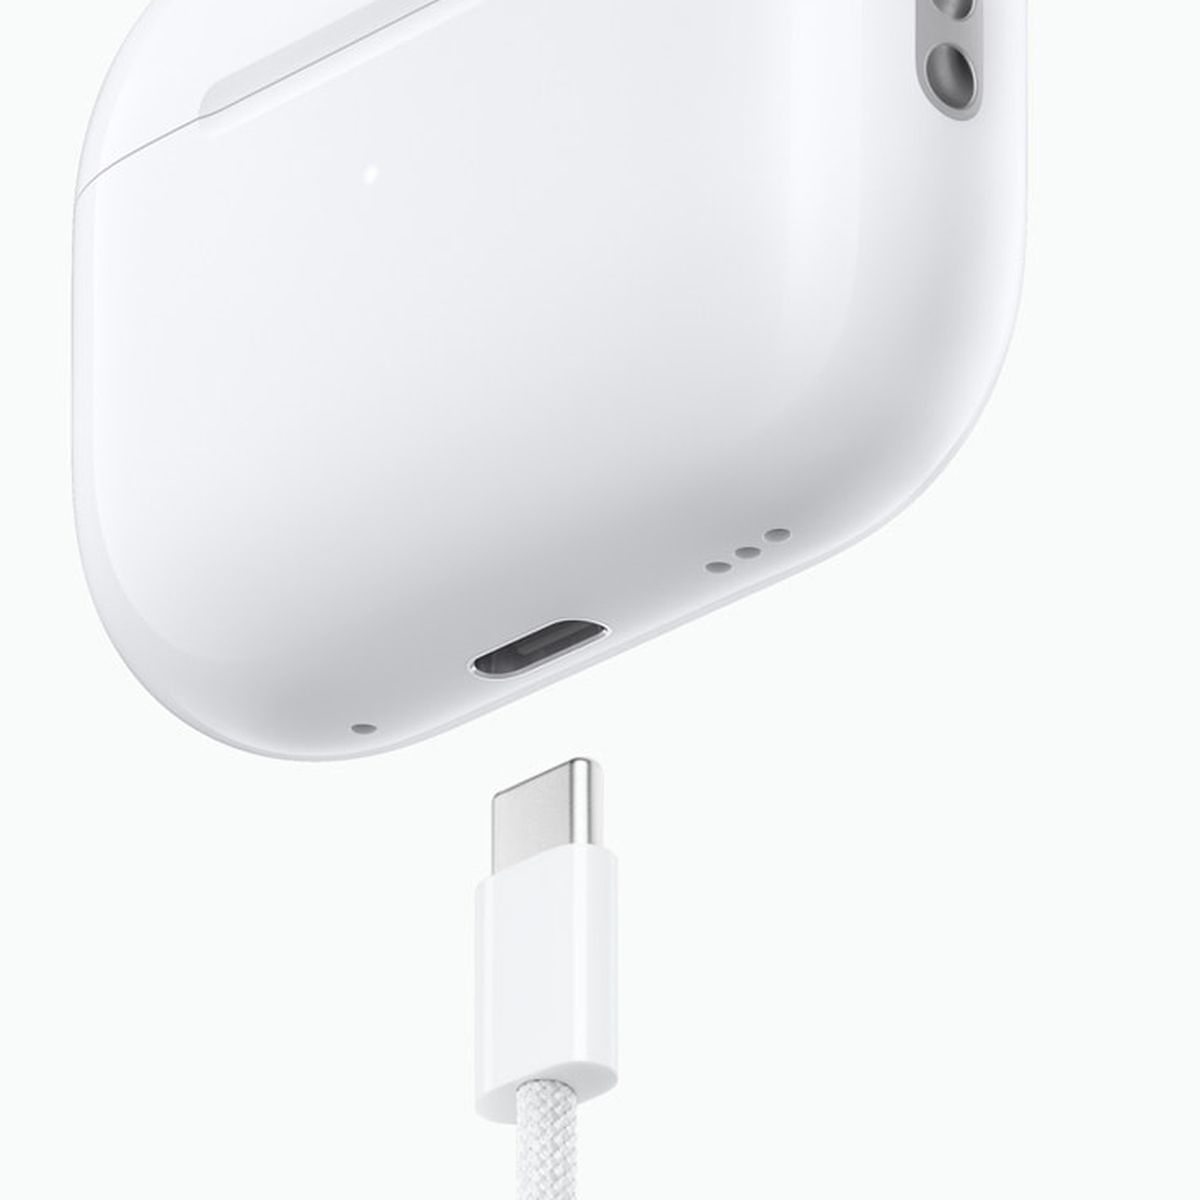 Apple Airpods Pro 2 updated with USB-C charging, lossless audio